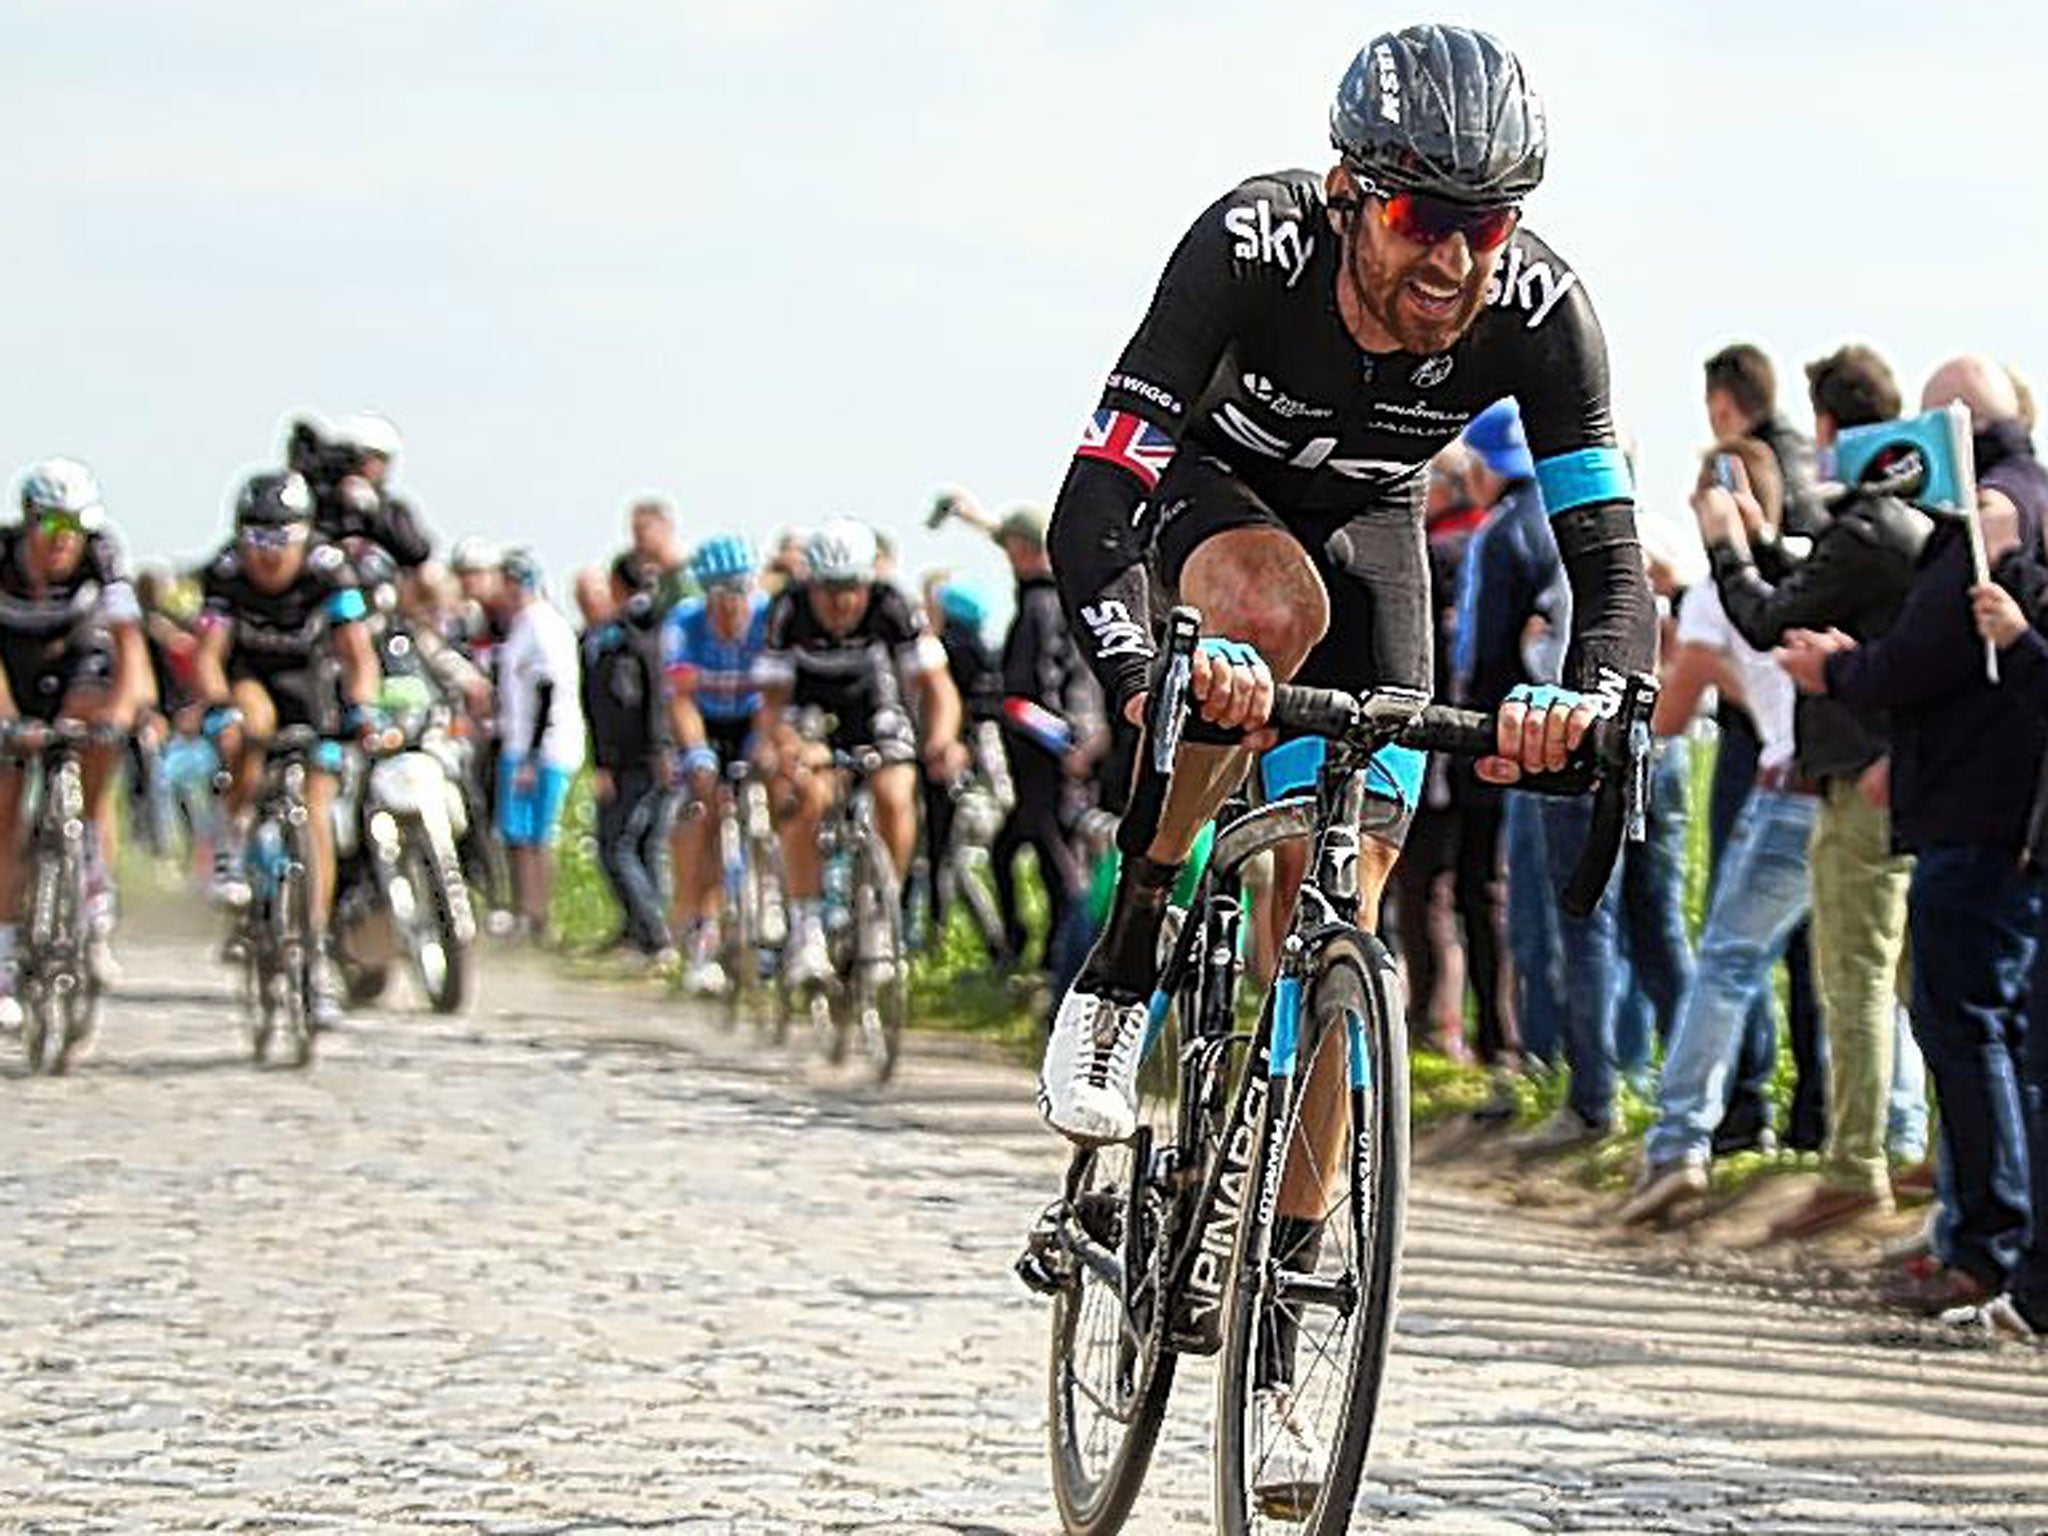 Sir Bradley Wiggins on one of the difficult cobbled sections of the Paris-Roubaix race